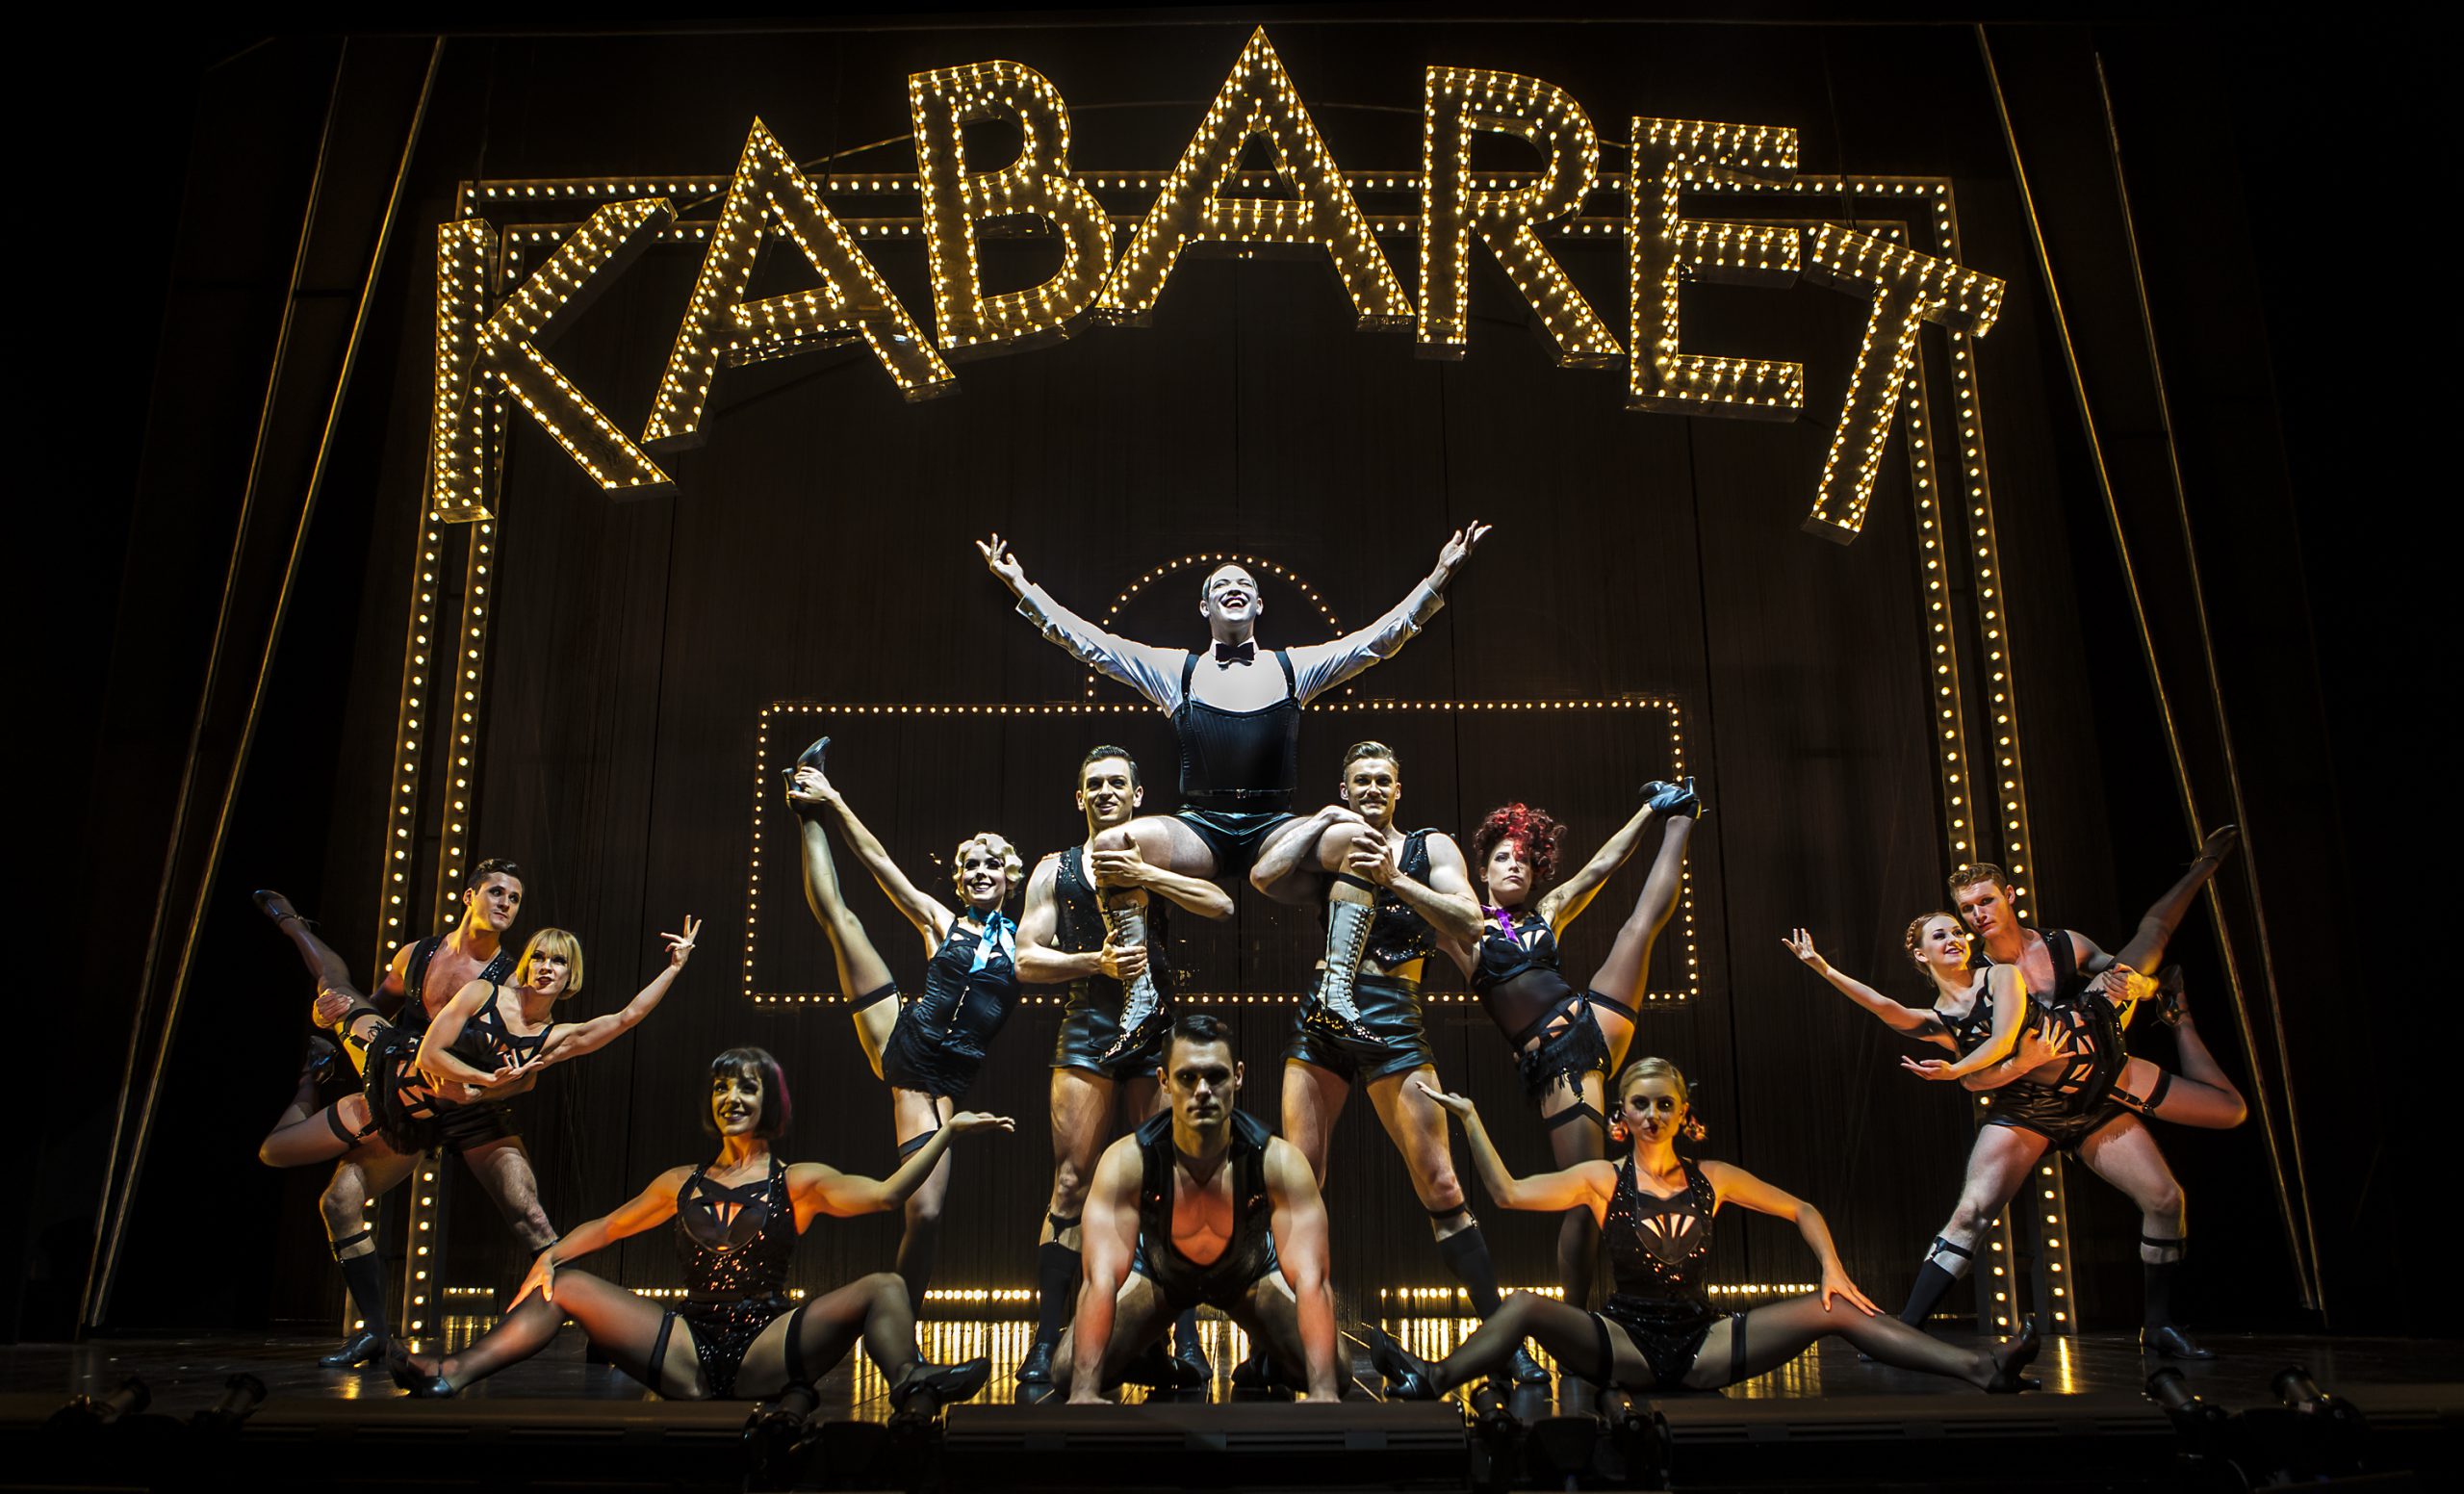 REVIEW Cabaret Willkommen to an astonishingly edgy, powerful